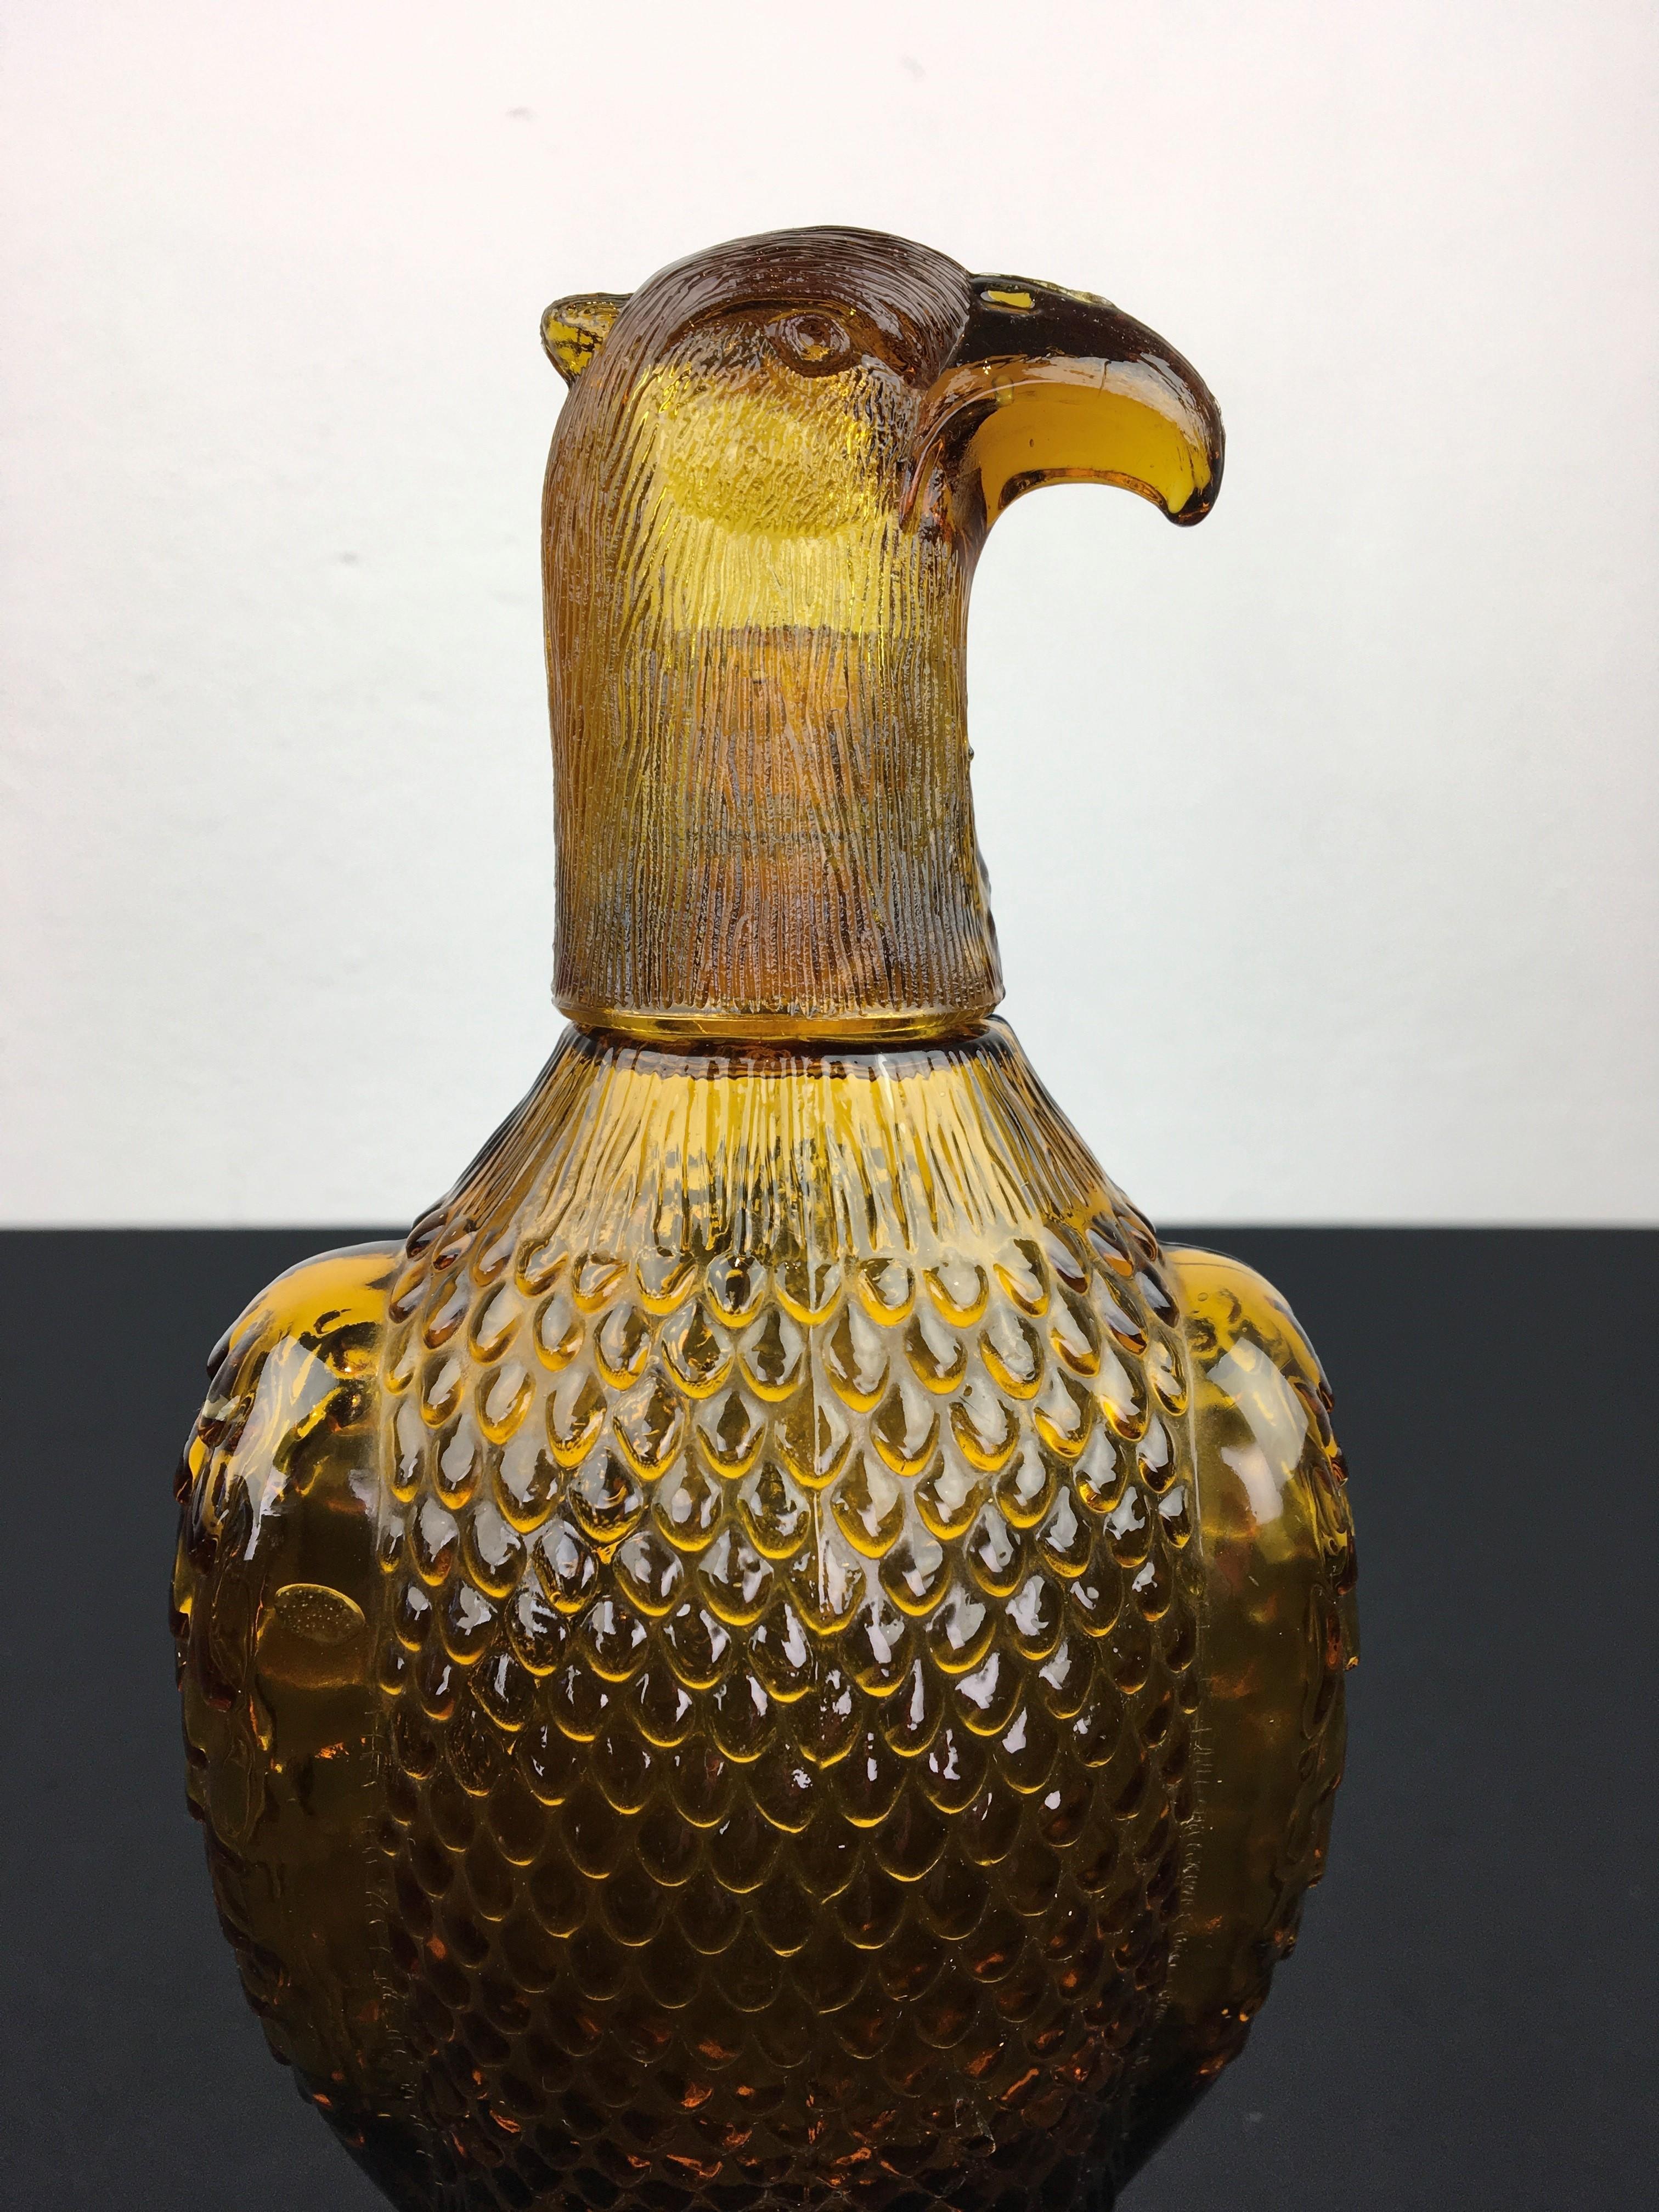 Amber glass decanter bottle in the shape of an Eagle bird. 
This glass eagle decanter is detailed and in the style of the Empoli glass decanter bottles. It will look great at your home bar or between your collection of decanter bottles. The head of